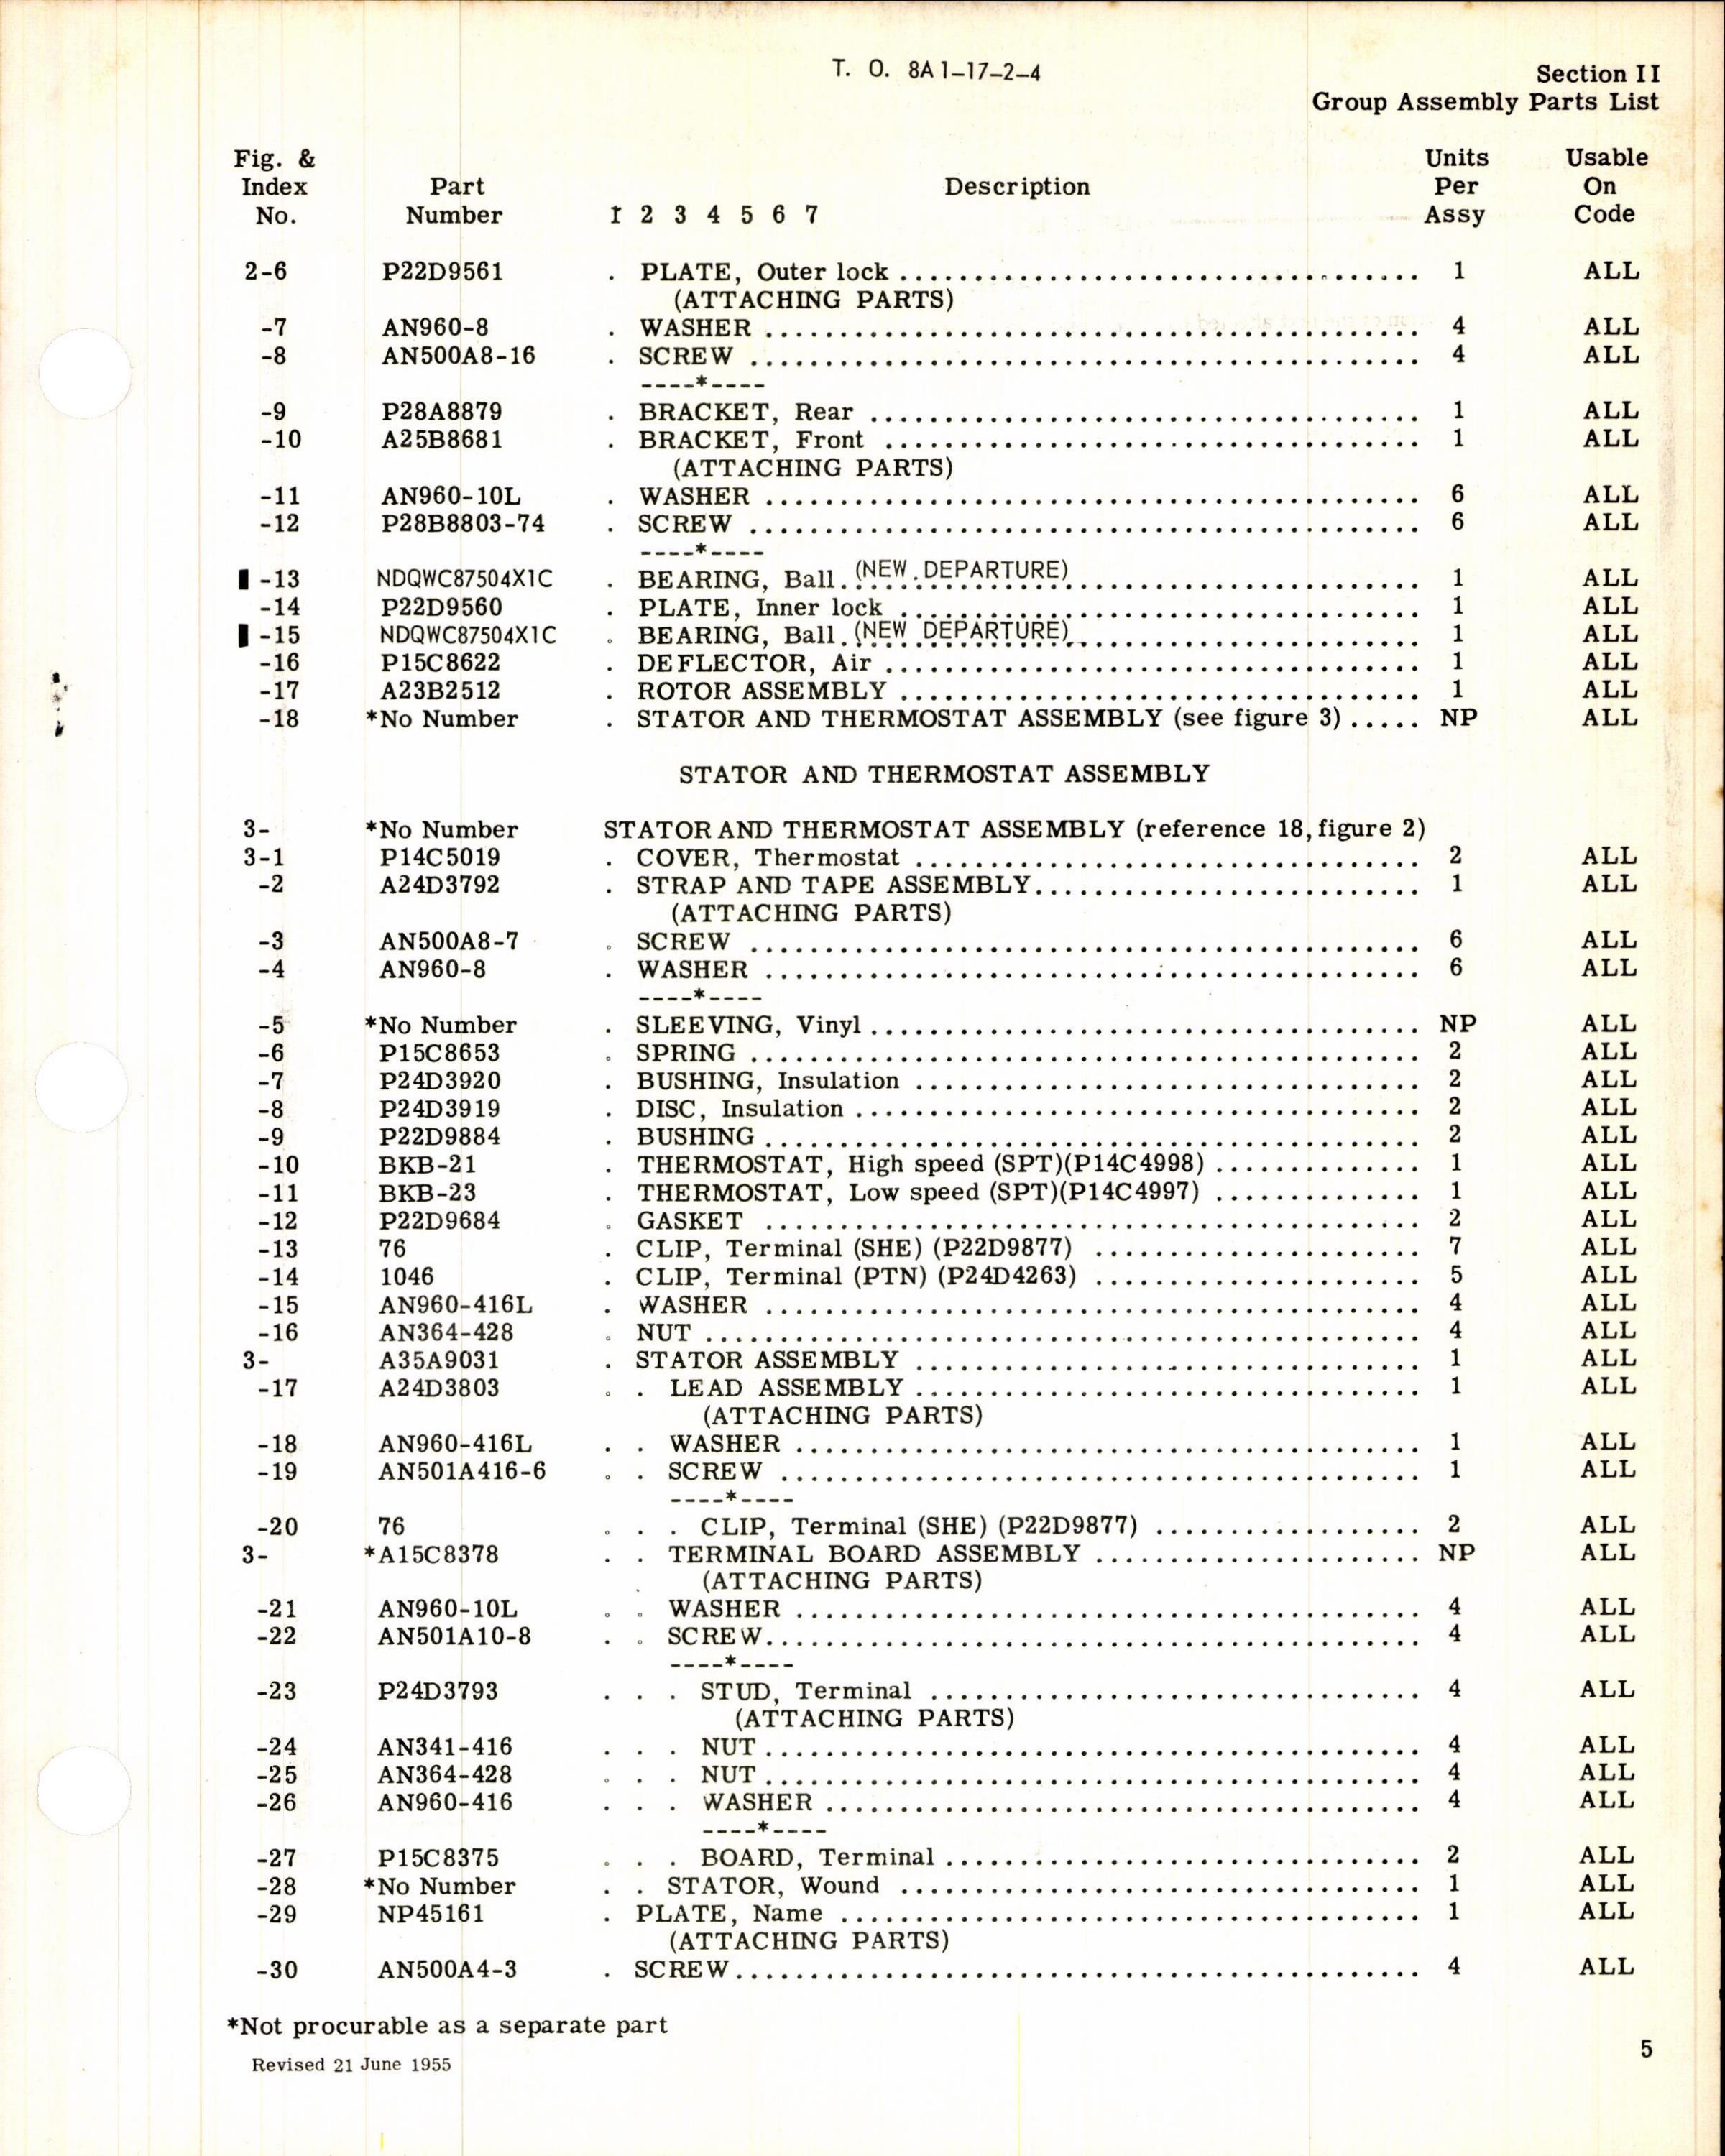 Sample page 3 from AirCorps Library document: Illustrated Parts Breakdown for Westinghouse Model A28A8881-2 A-C Motor